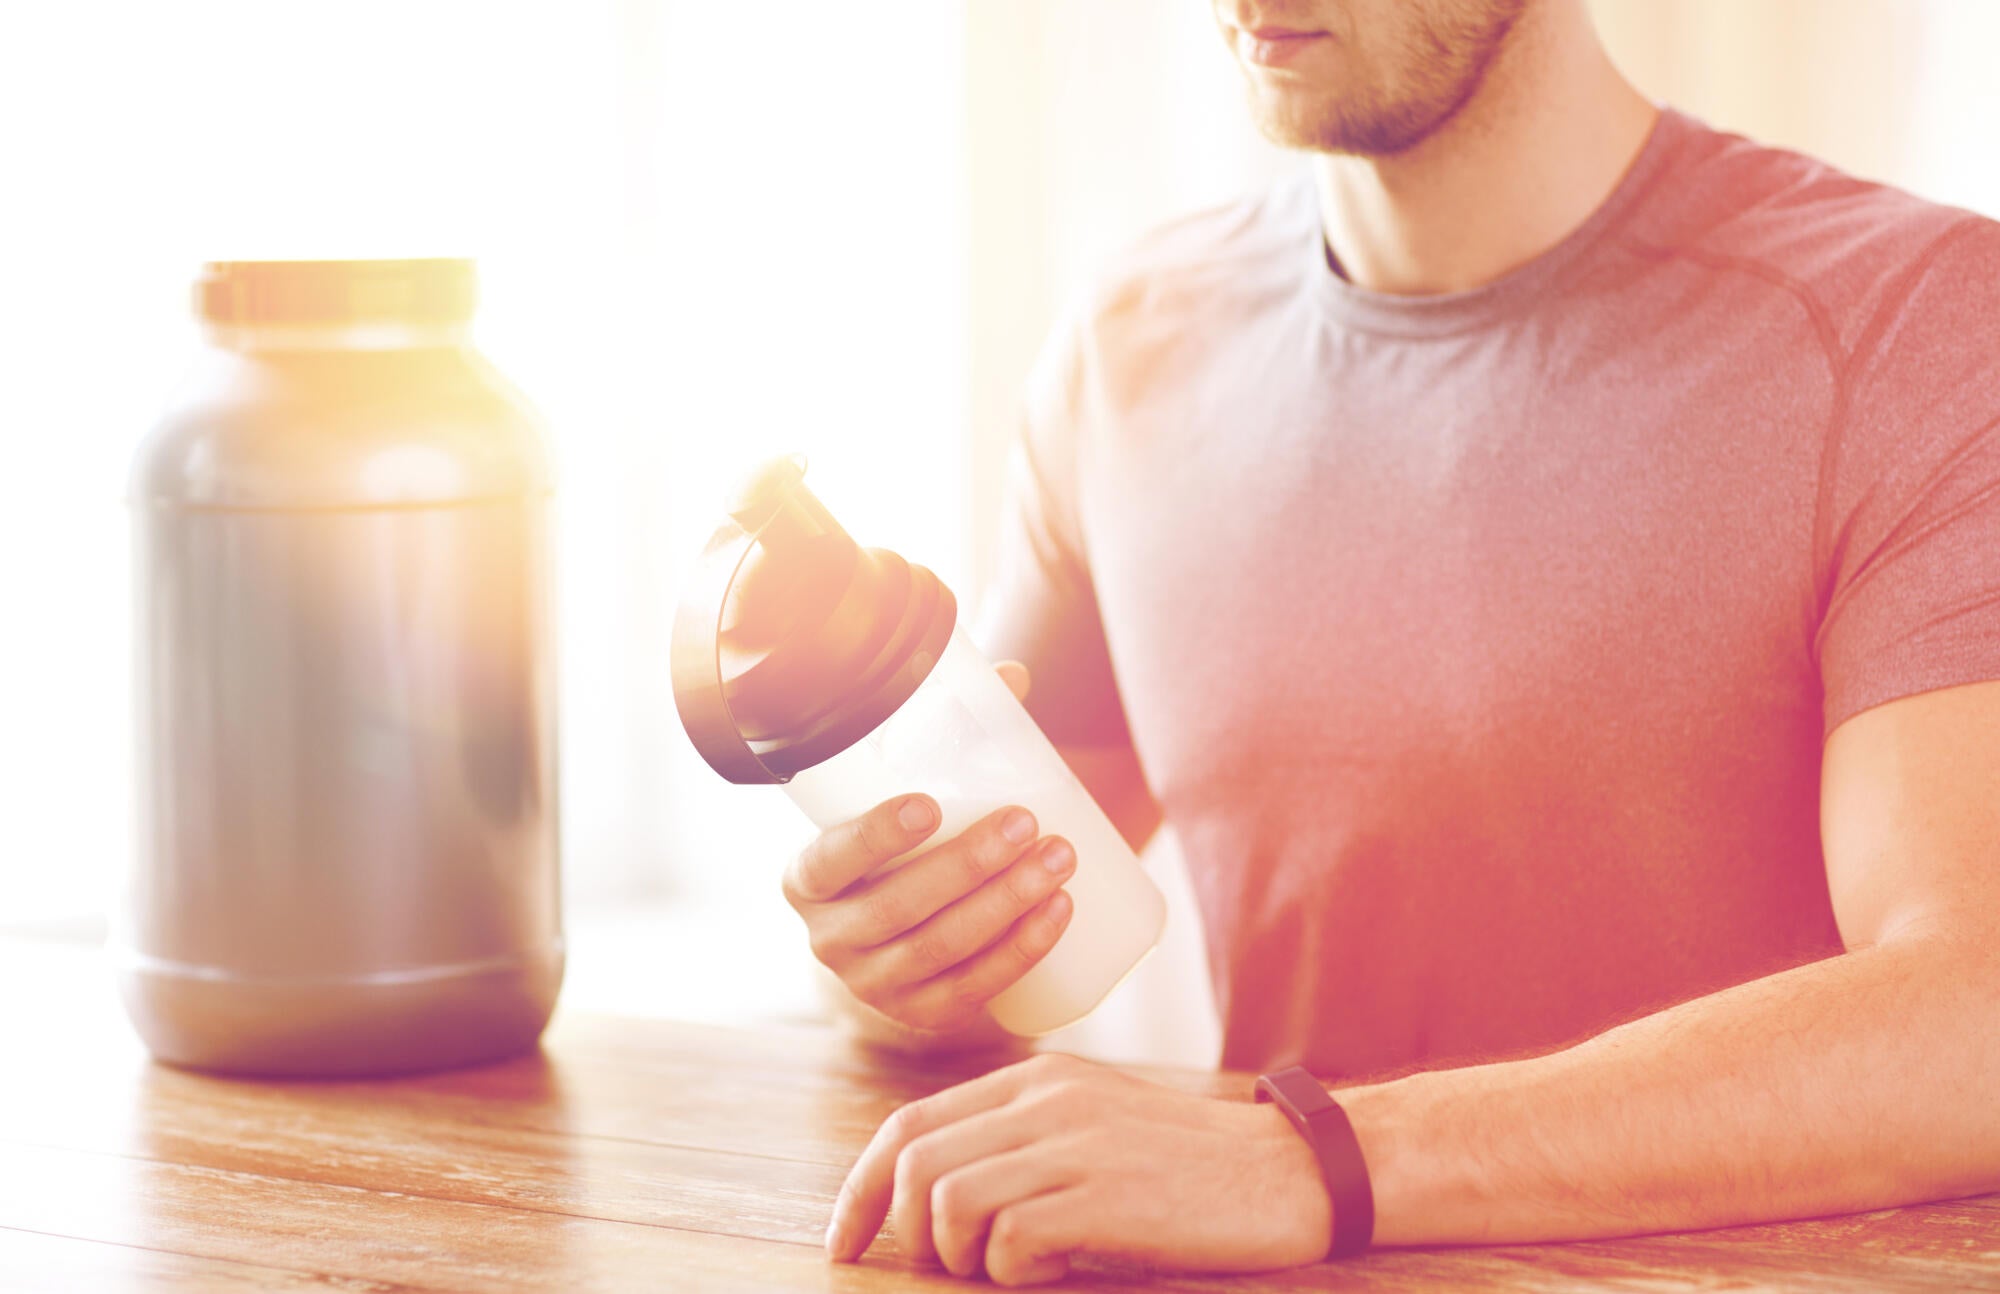 A Day of Hard Work: The Best Vitamins and Supplements for Recovery